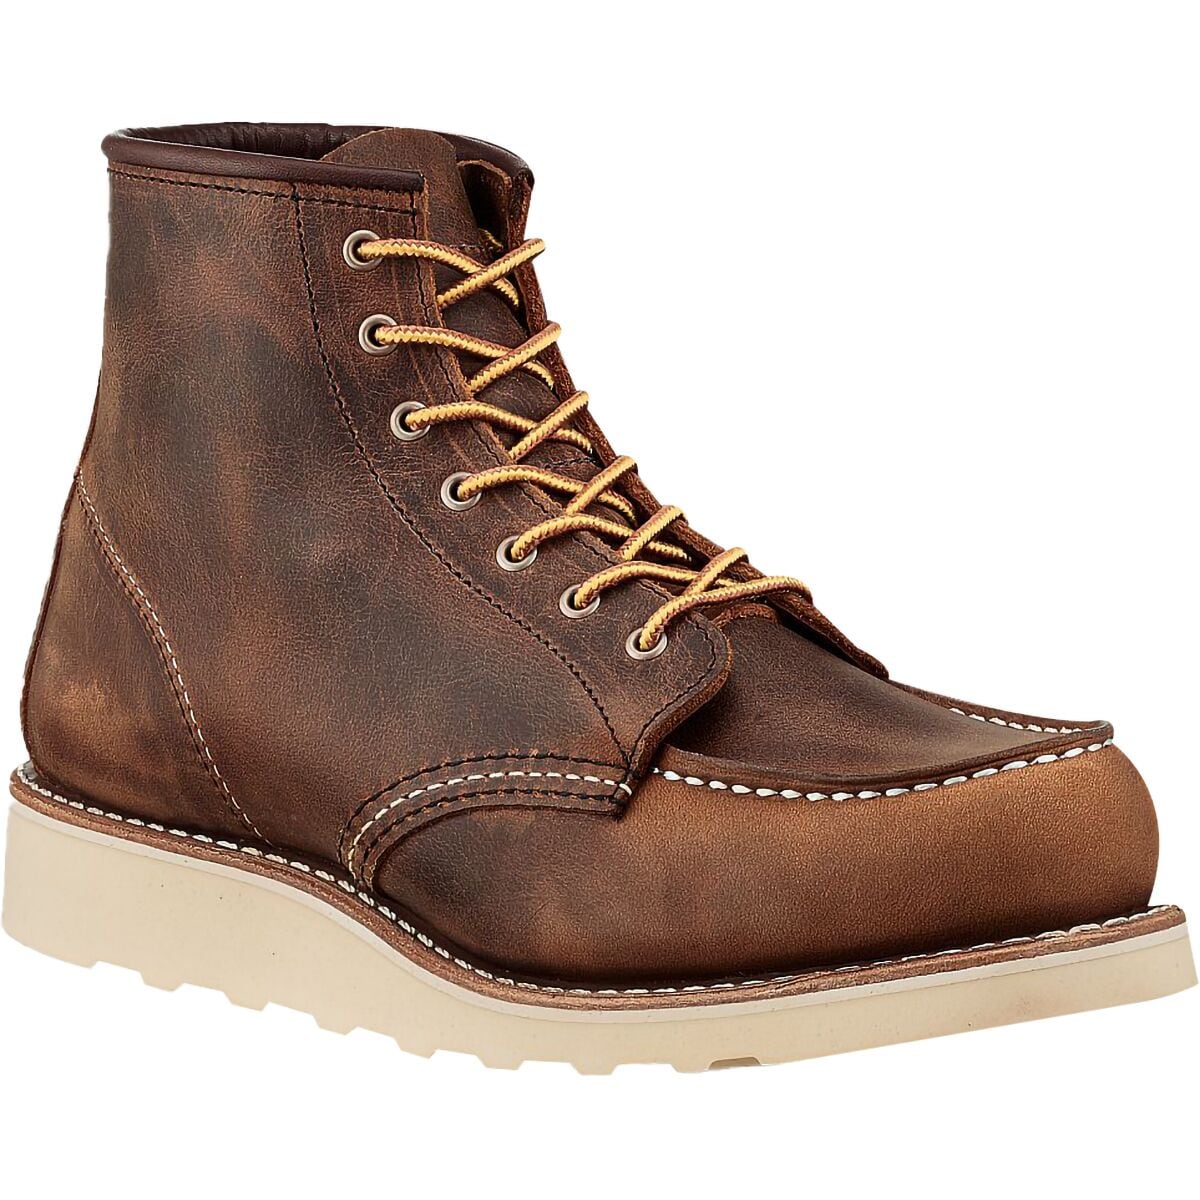 Red Wing Heritage Classic Moc 6in Boot - Women's